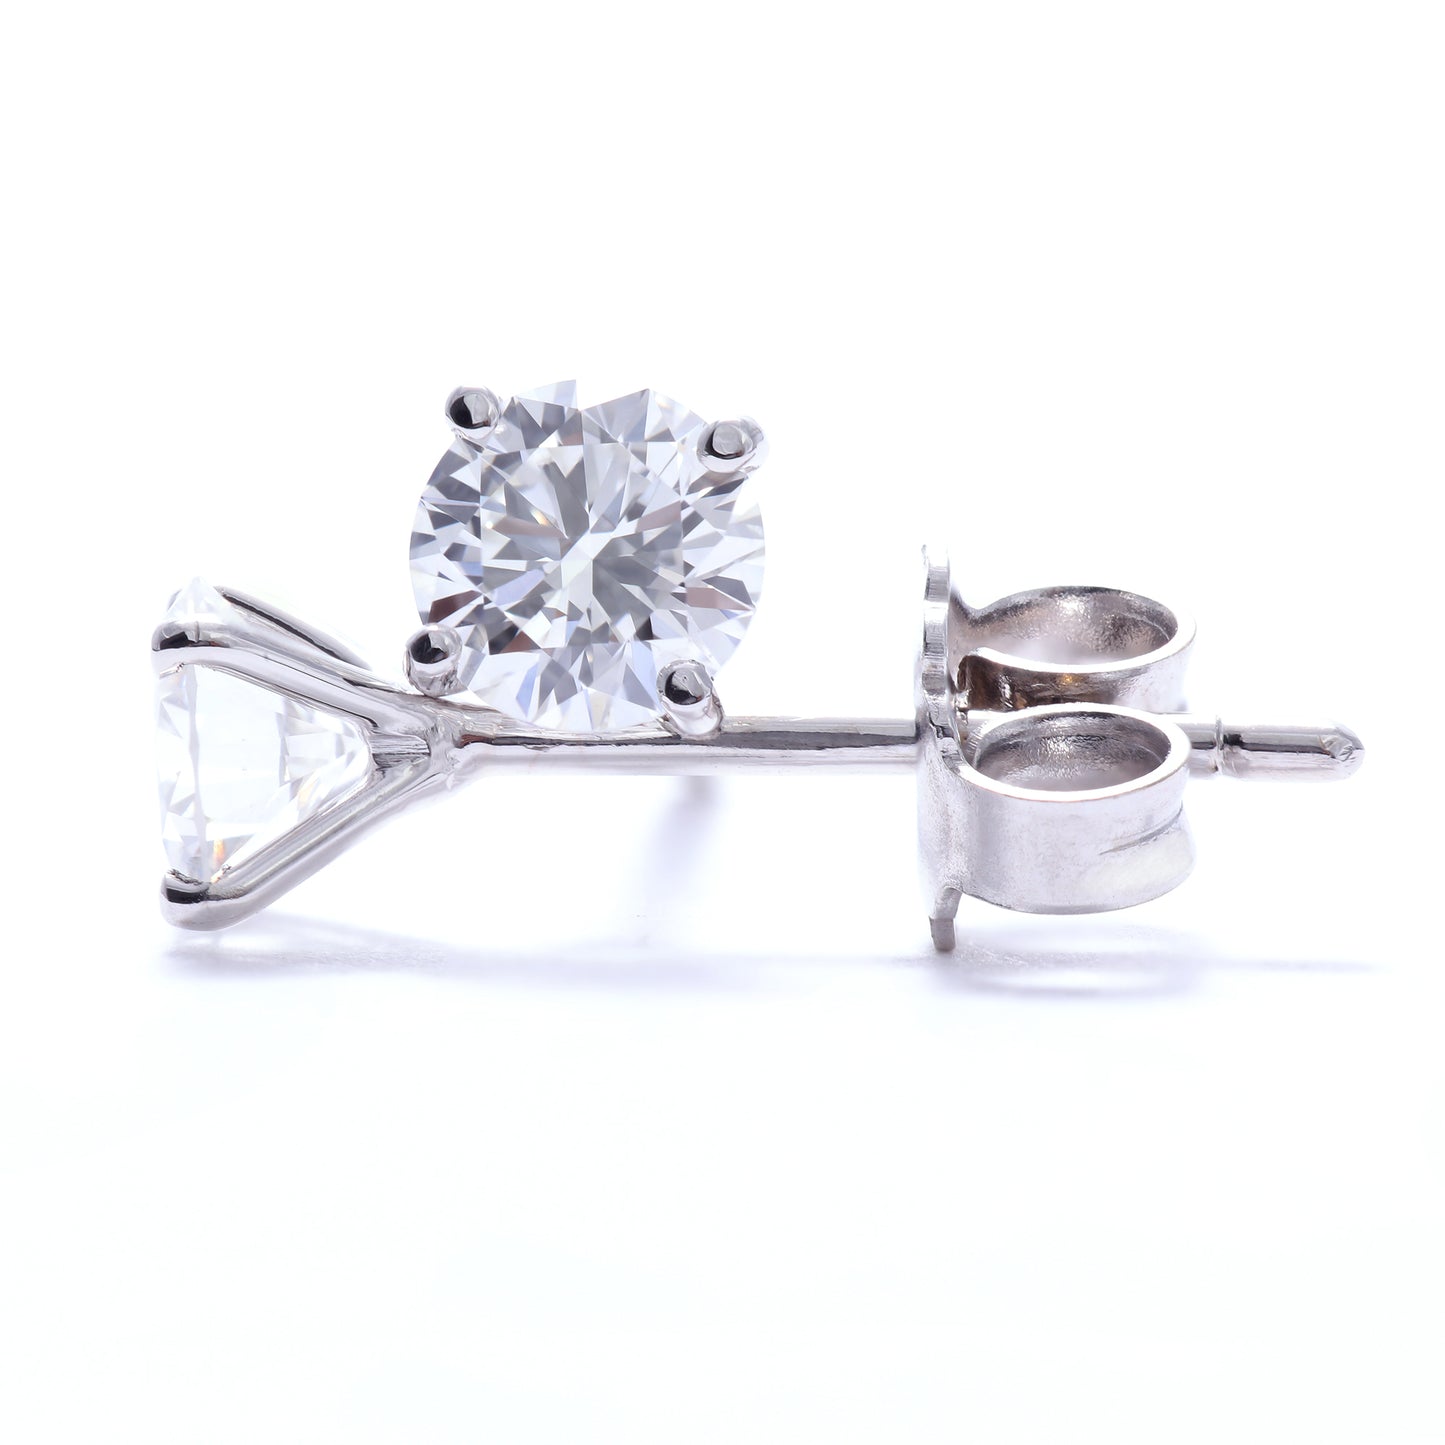 Load image into Gallery viewer, Lab Grown Stud Diamond Earrings 0.75 Total Carat Weight
